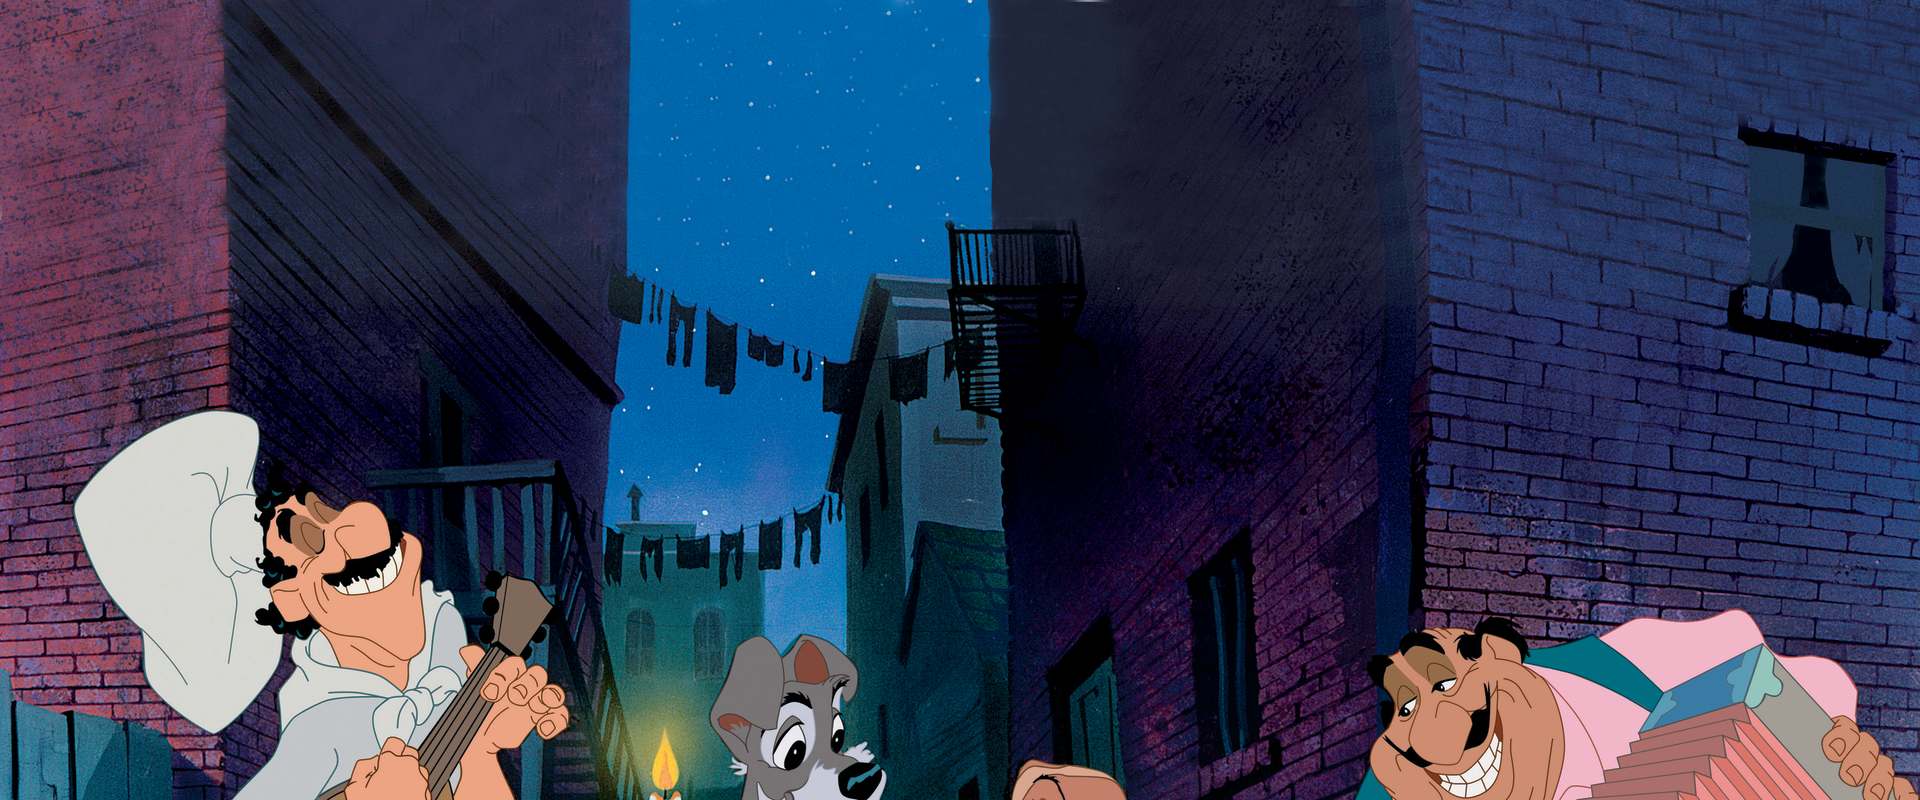 Lady and the Tramp background 2